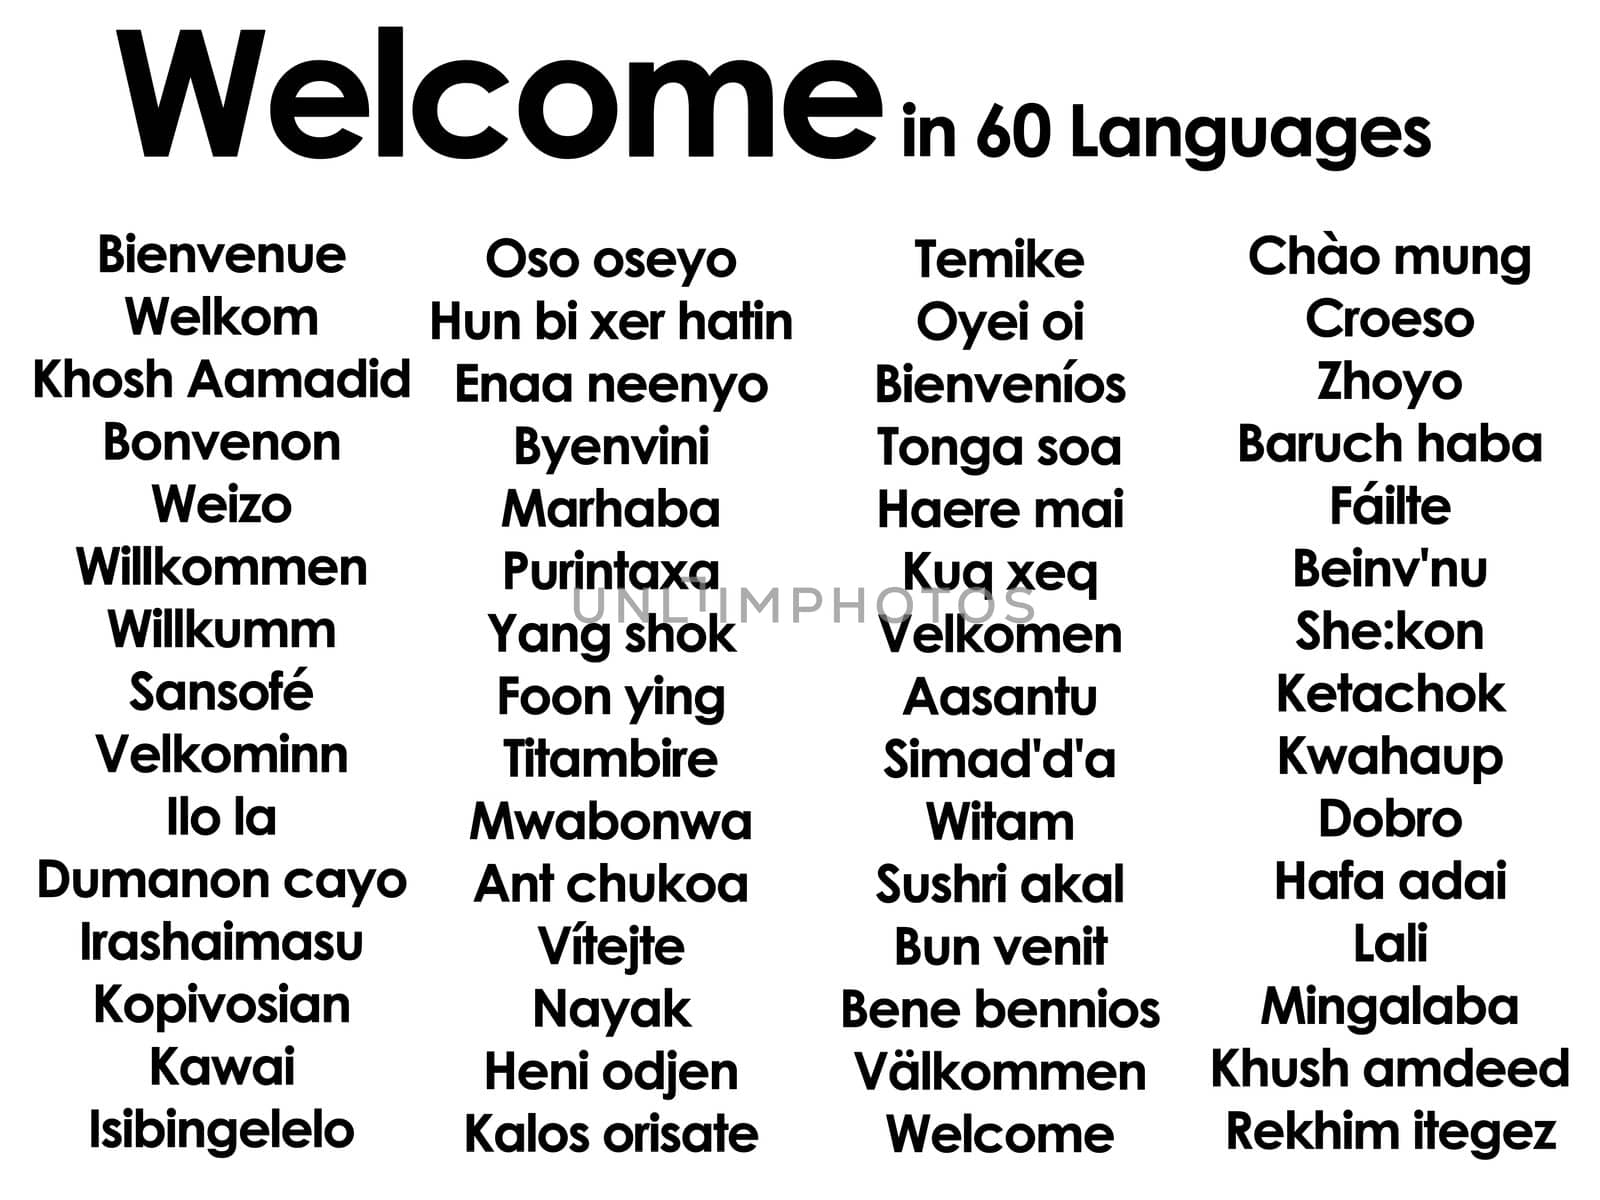 Welcome marhaba wilcommen written in lots of 60 different langua by bobbigmac